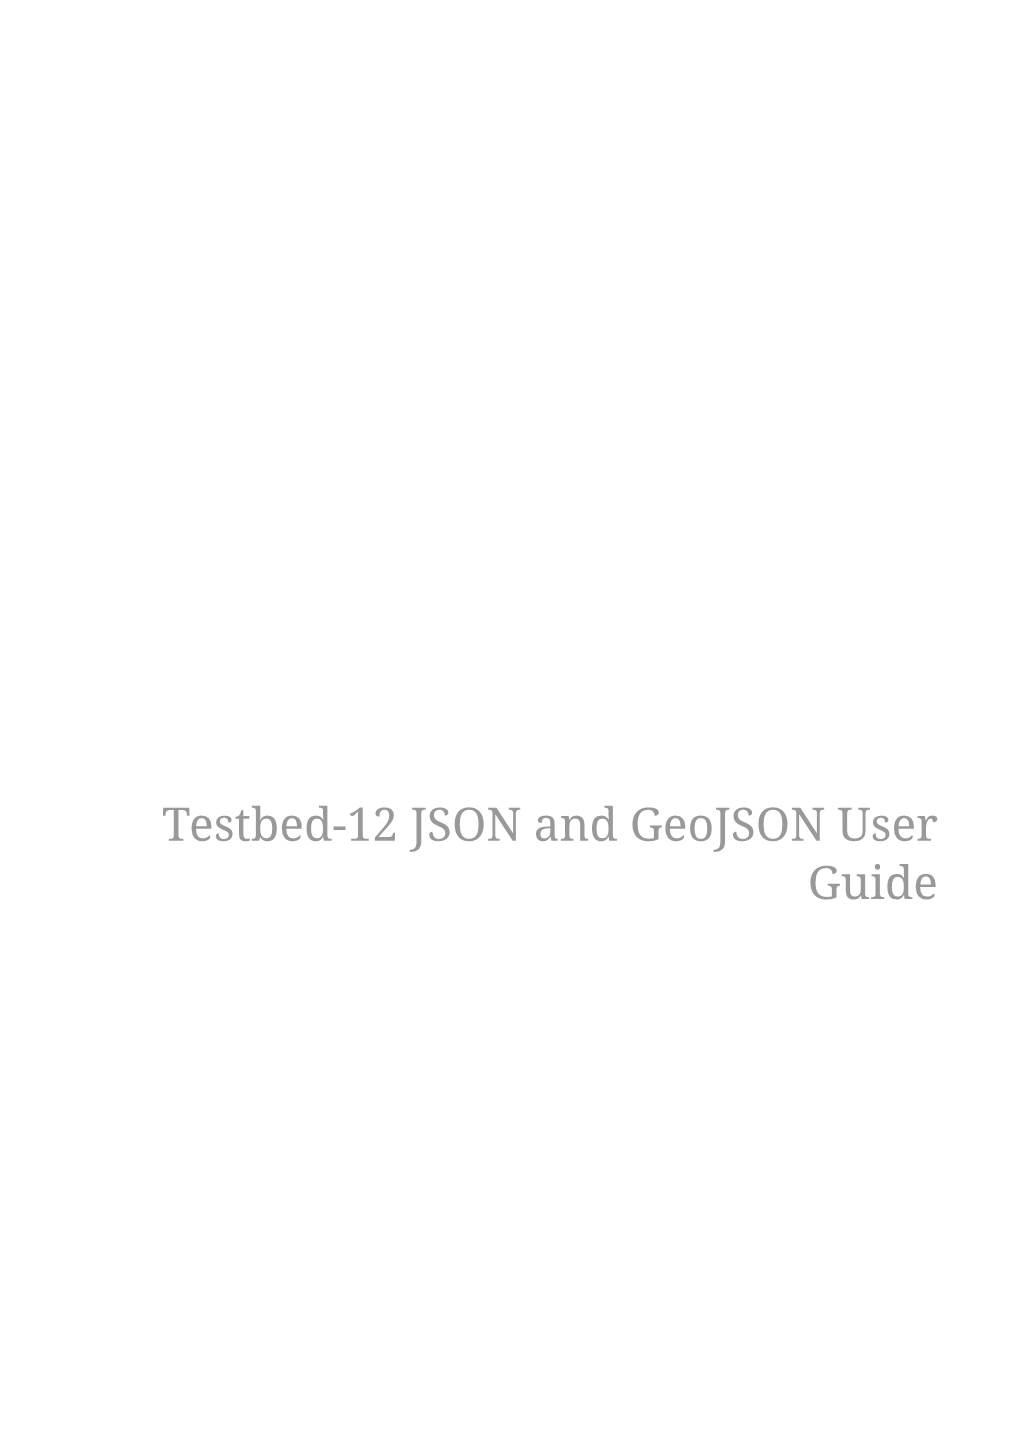 Testbed-12 JSON and Geojson User Guide Table of Contents